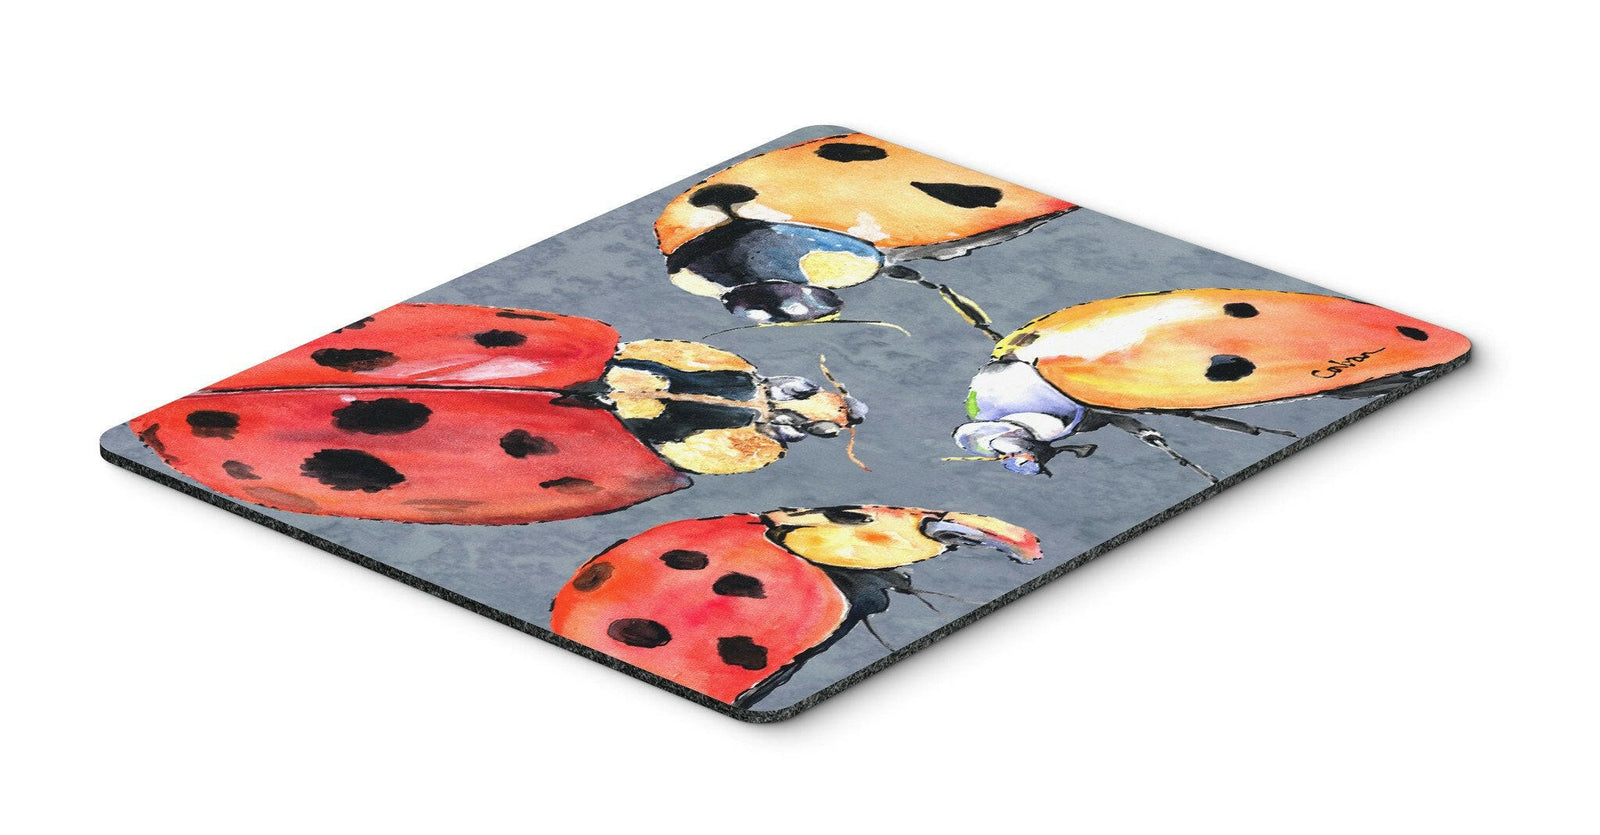 Lady Bug Multiple Mouse Pad, Hot Pad or Trivet by Caroline's Treasures